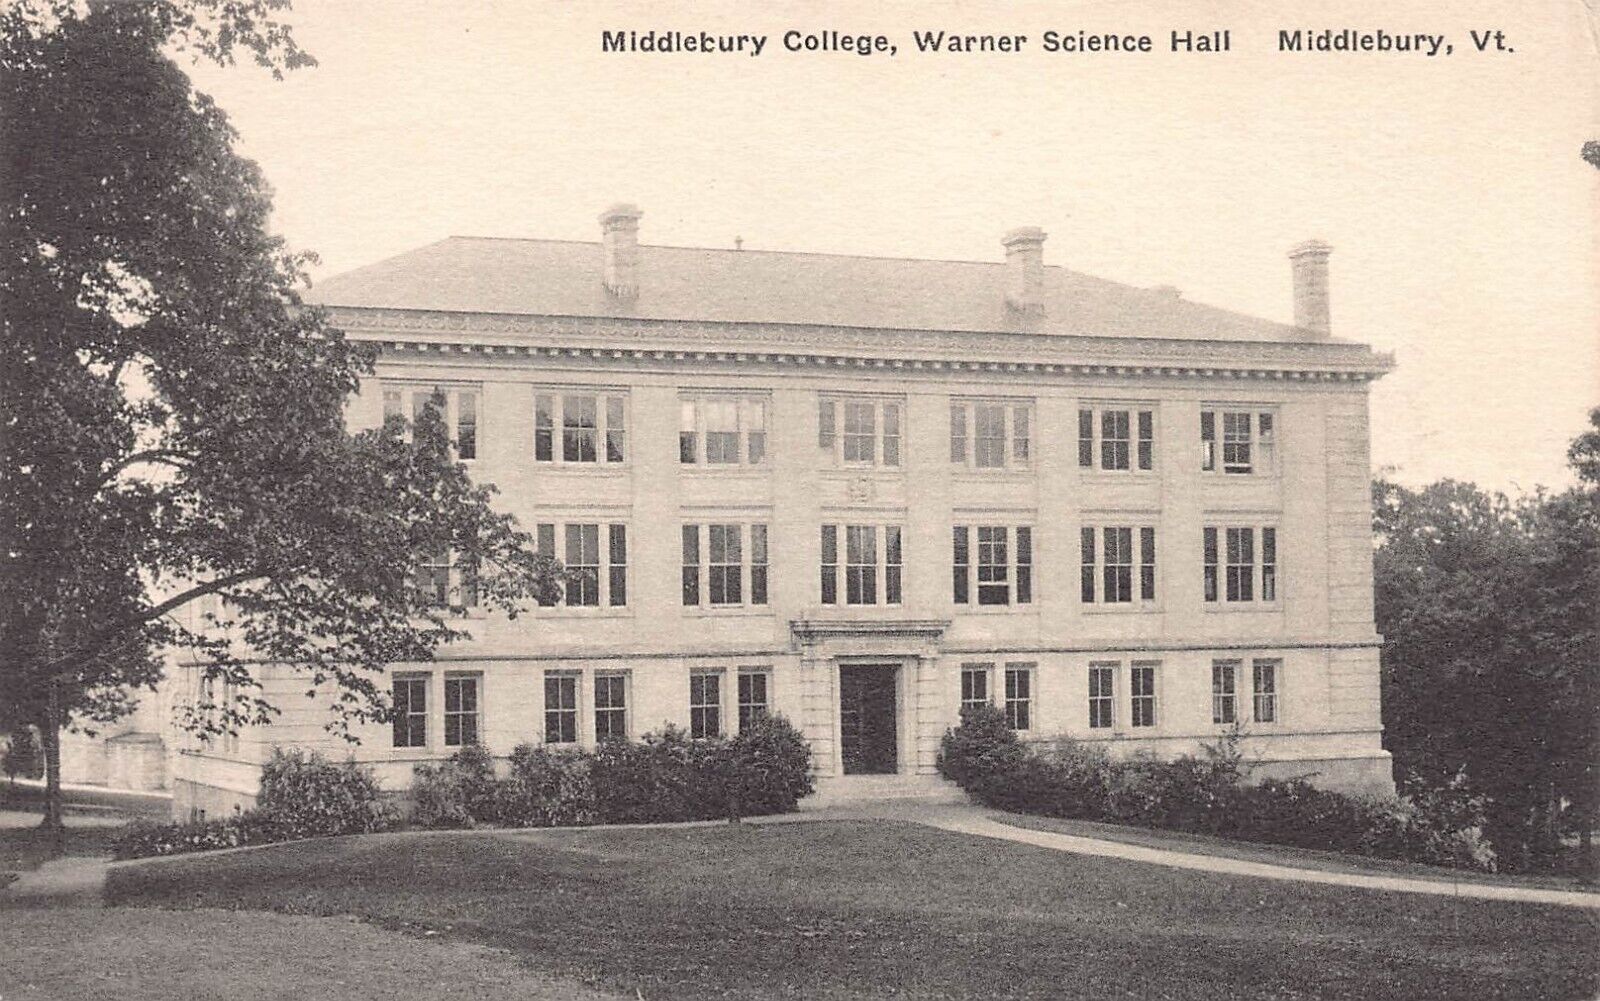 Warner Science Hall, Middlebury College, Middlebury, Vermont, 1930 Postcard